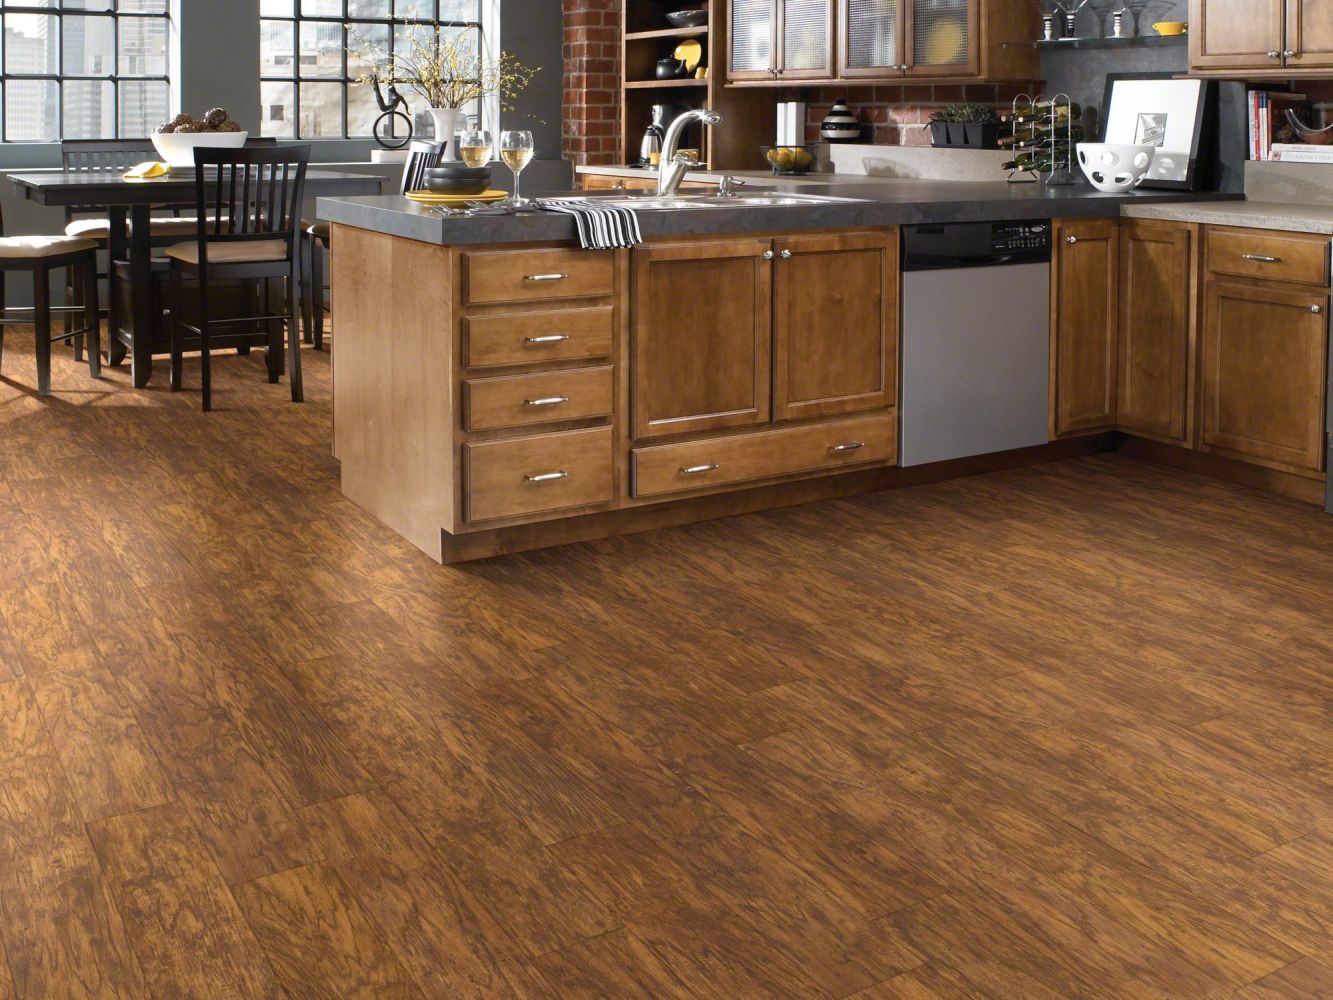 Resilient Residential Classico Plus Plank Shaw Floors  Oro 00255_2426V